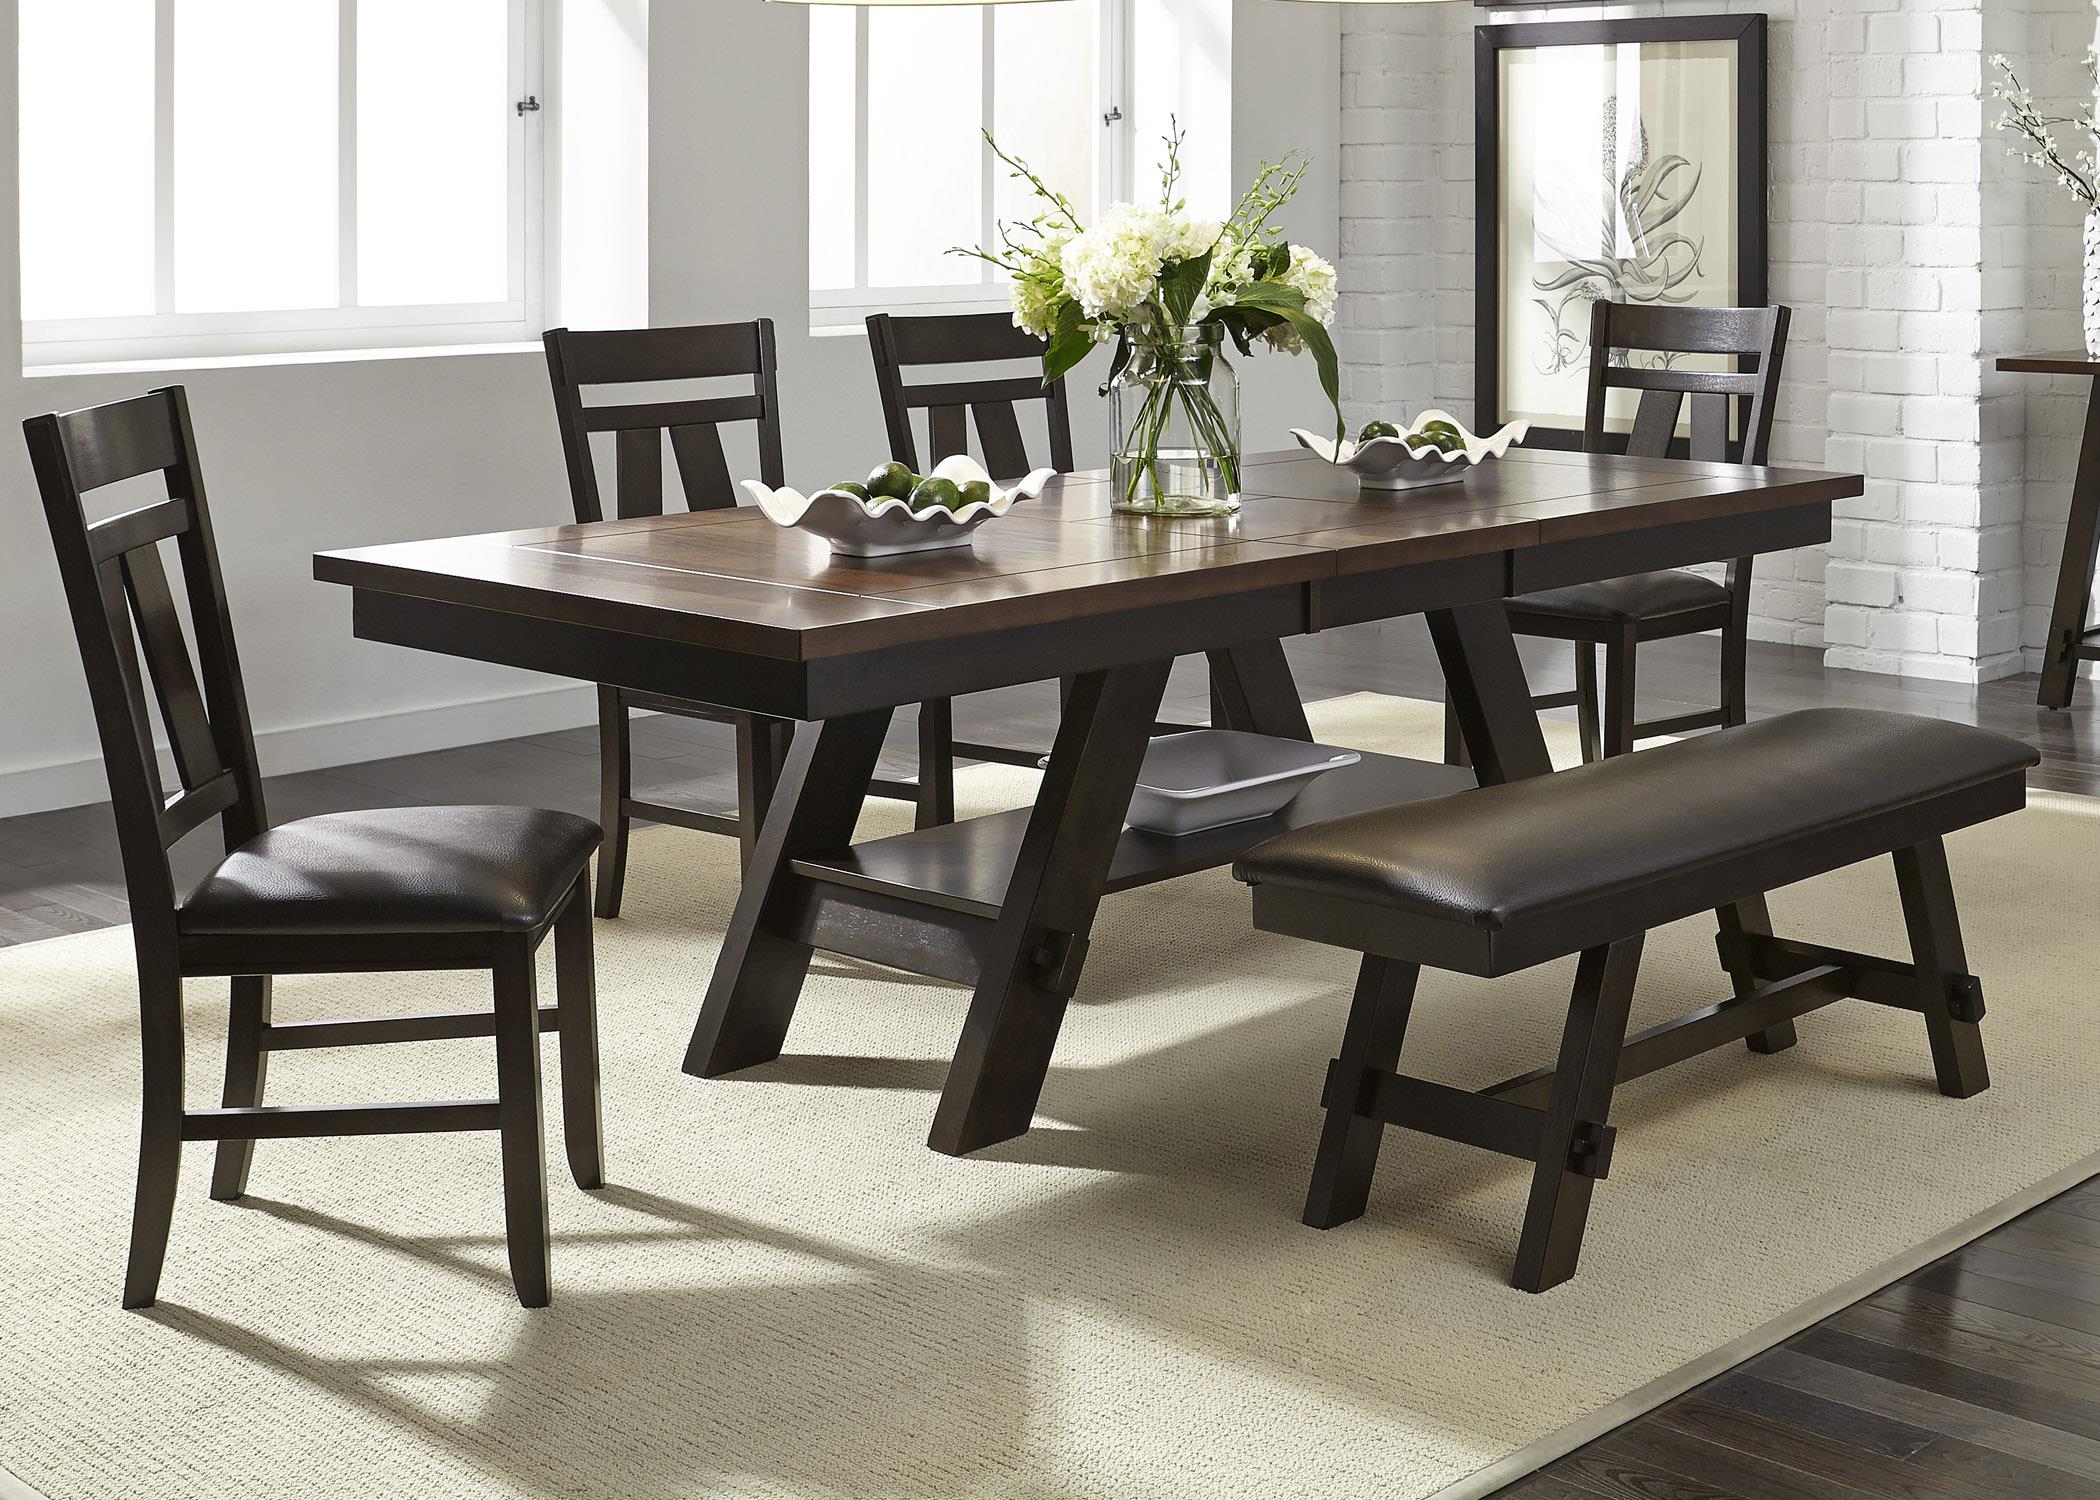 Rectangle Dining Set With Bench Clearance Sale, UP TO 20 OFF ...